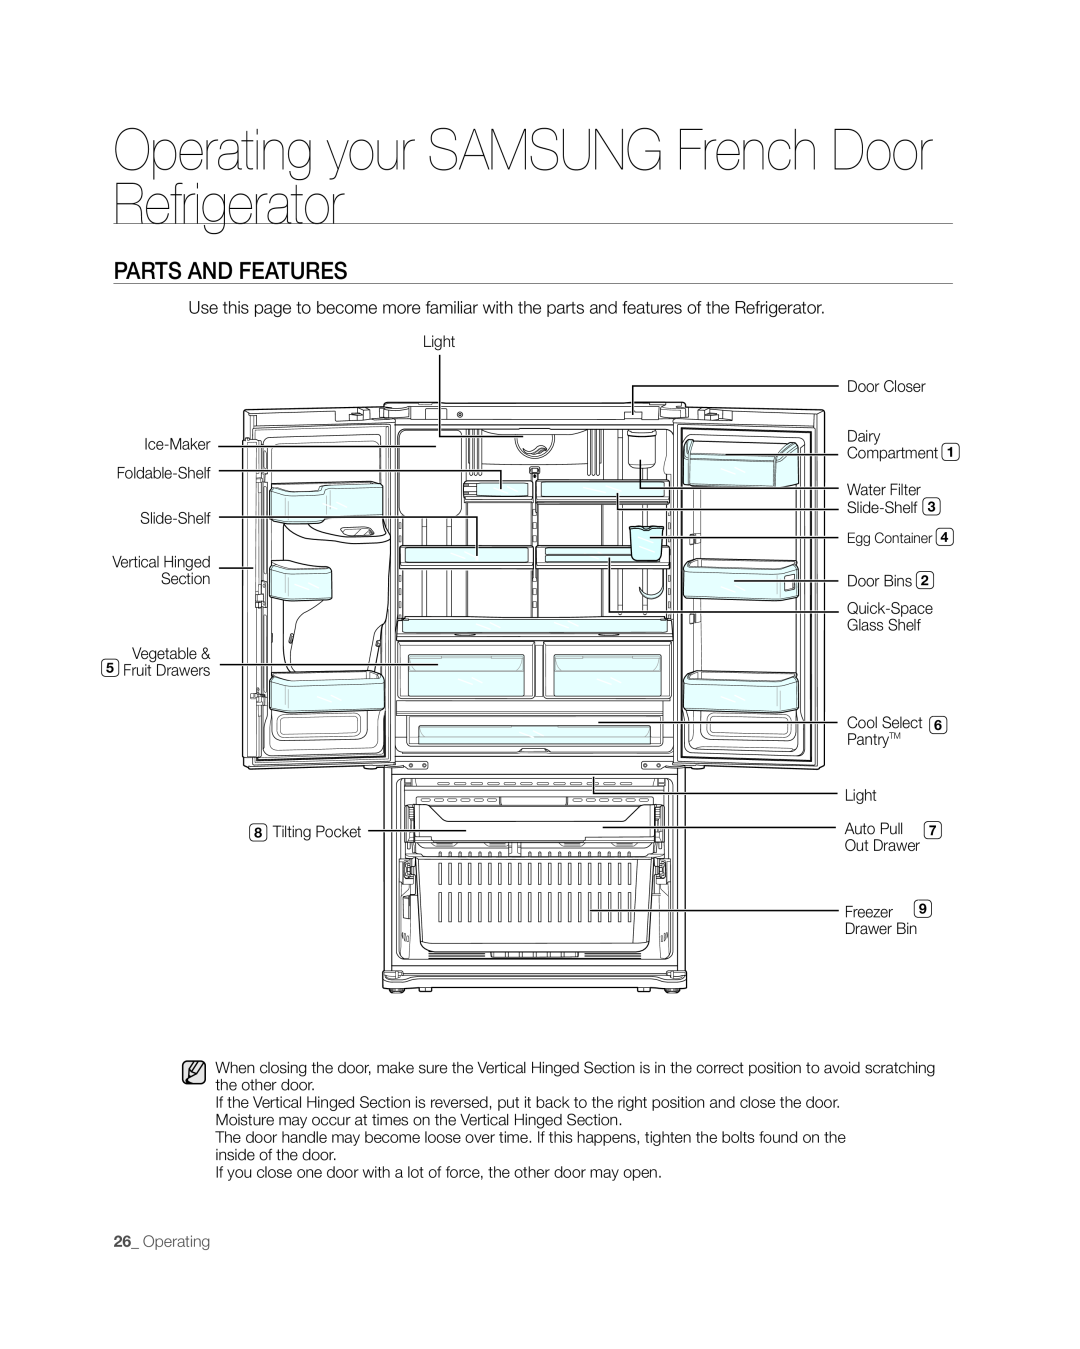 Samsung RFG297AAWP user manual Parts And Features, Operating your SAMSUNG French Door Refrigerator 